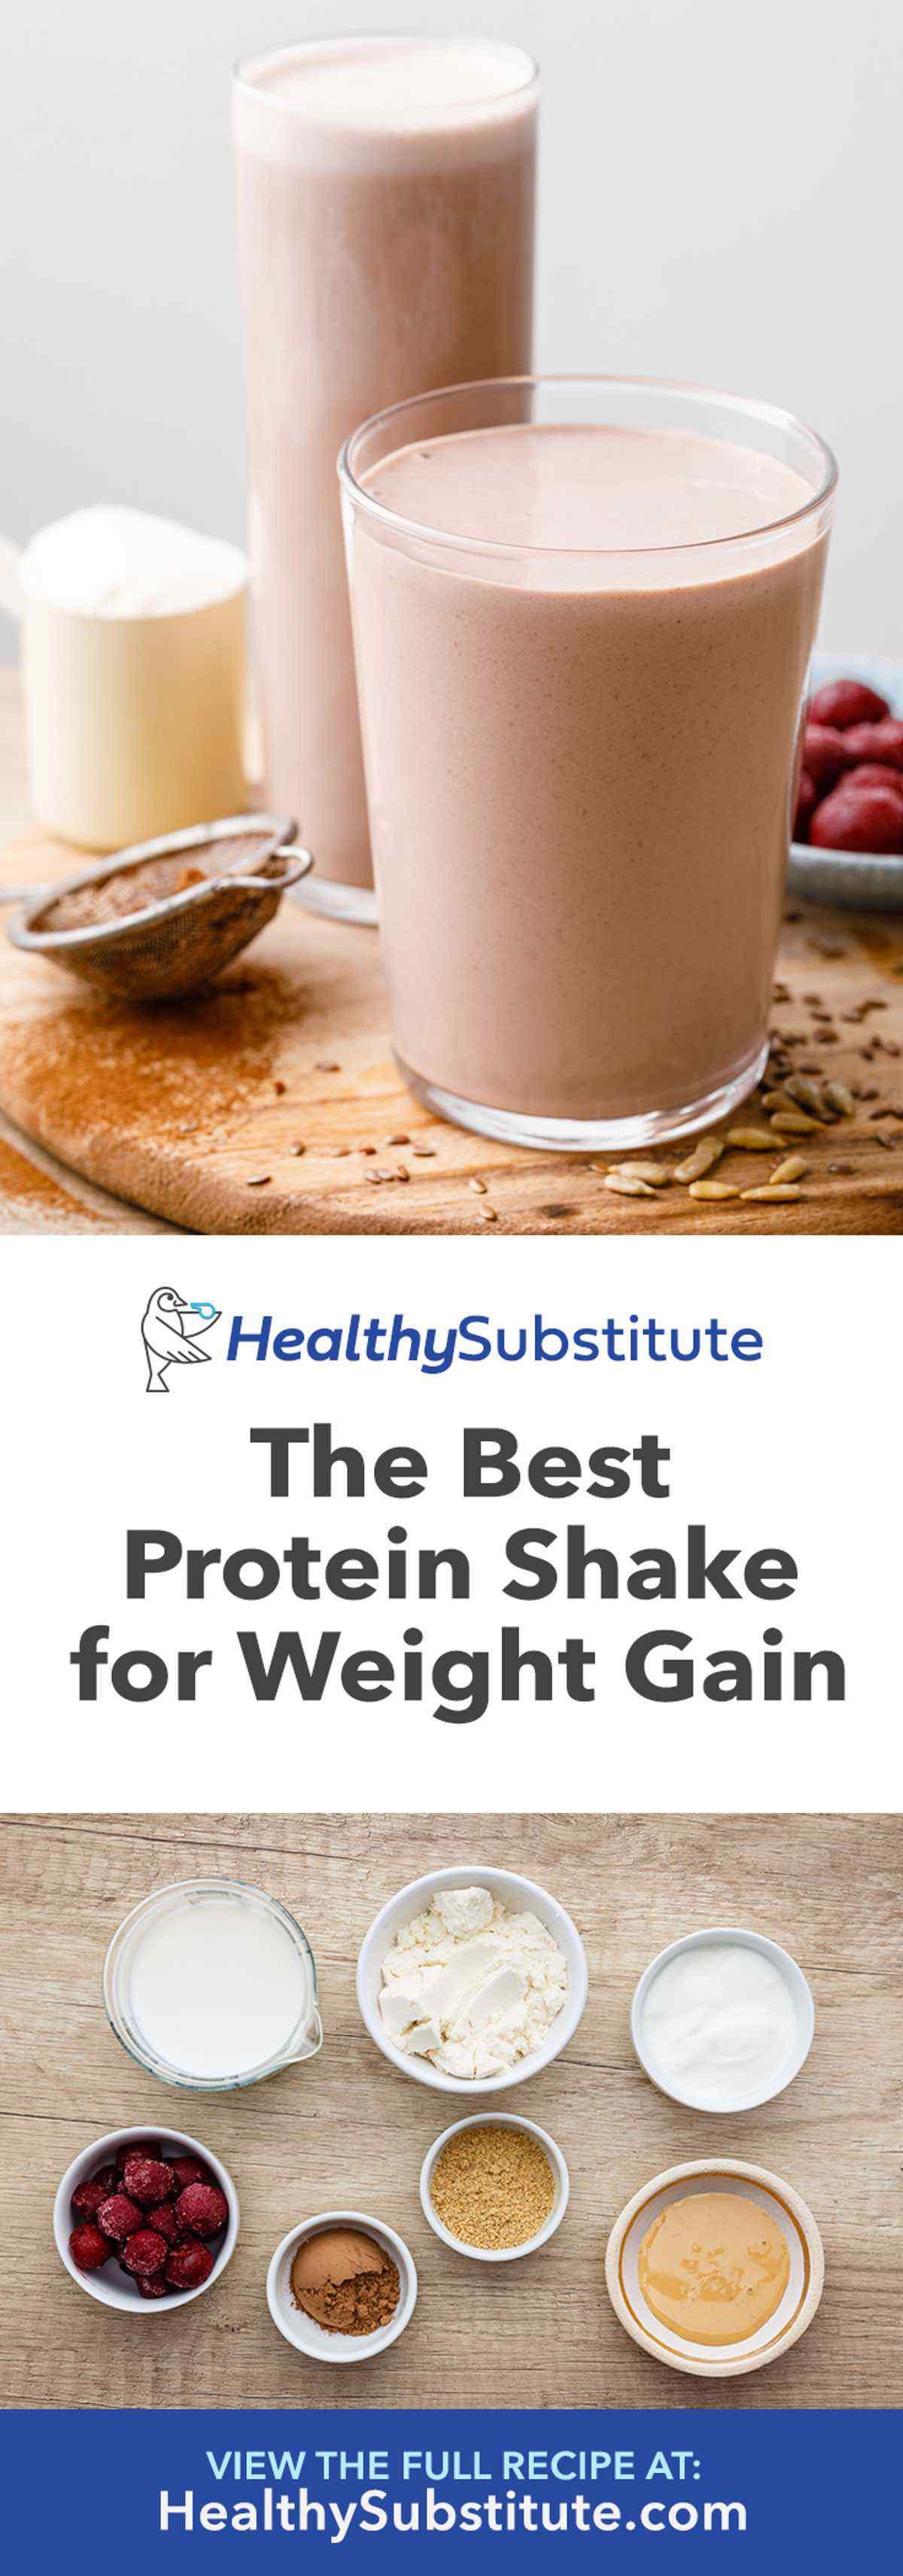 Protein Shake for Weight Gain